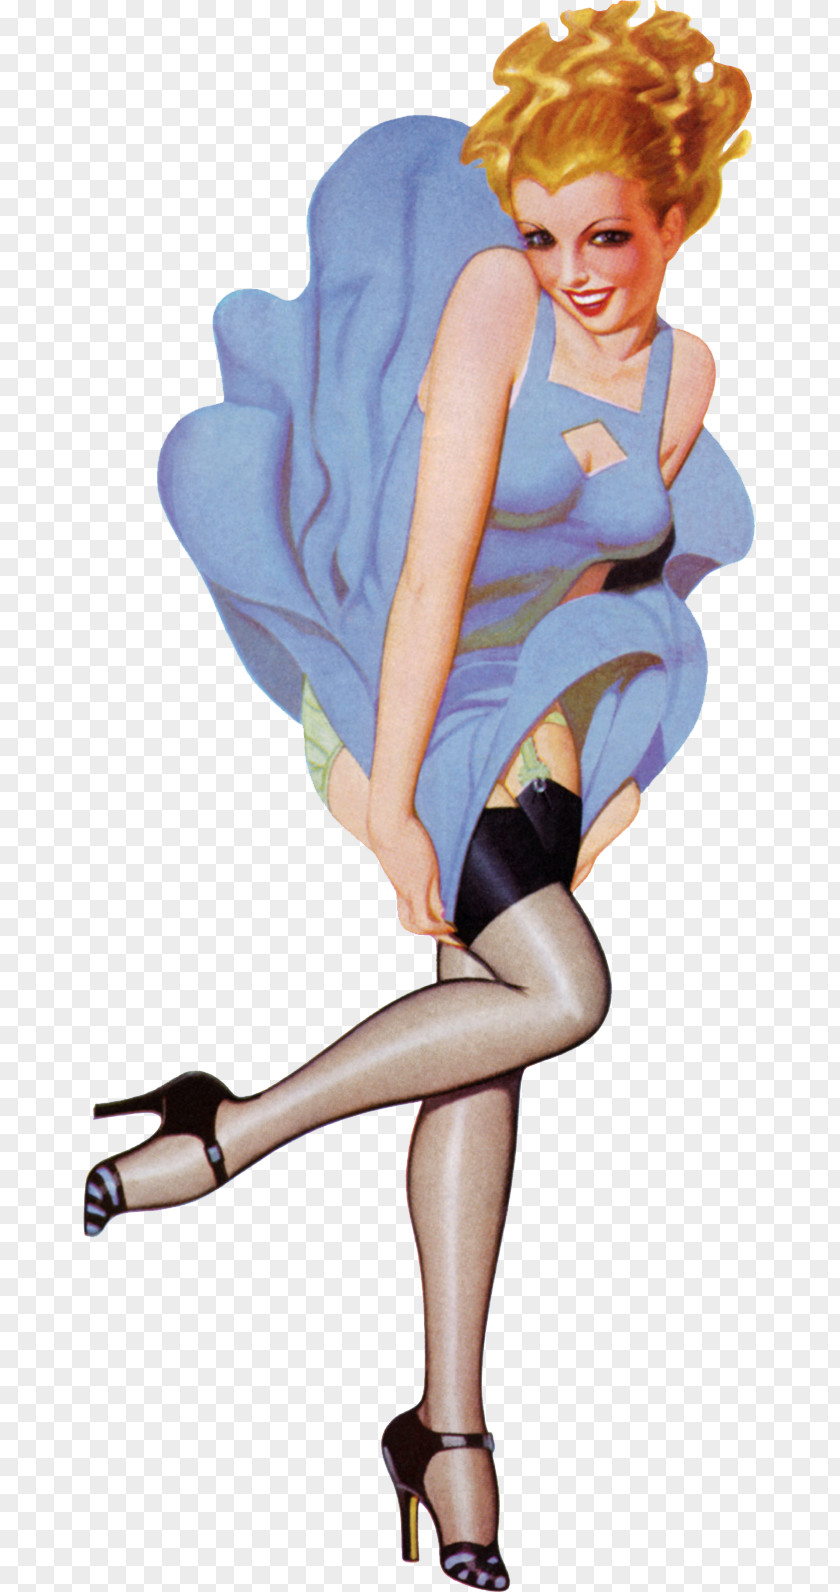 Dita Von Teese Pin-up Girl Poster Vintage Clothing Illustrator PNG girl clothing Illustrator, Pin clipart PNG